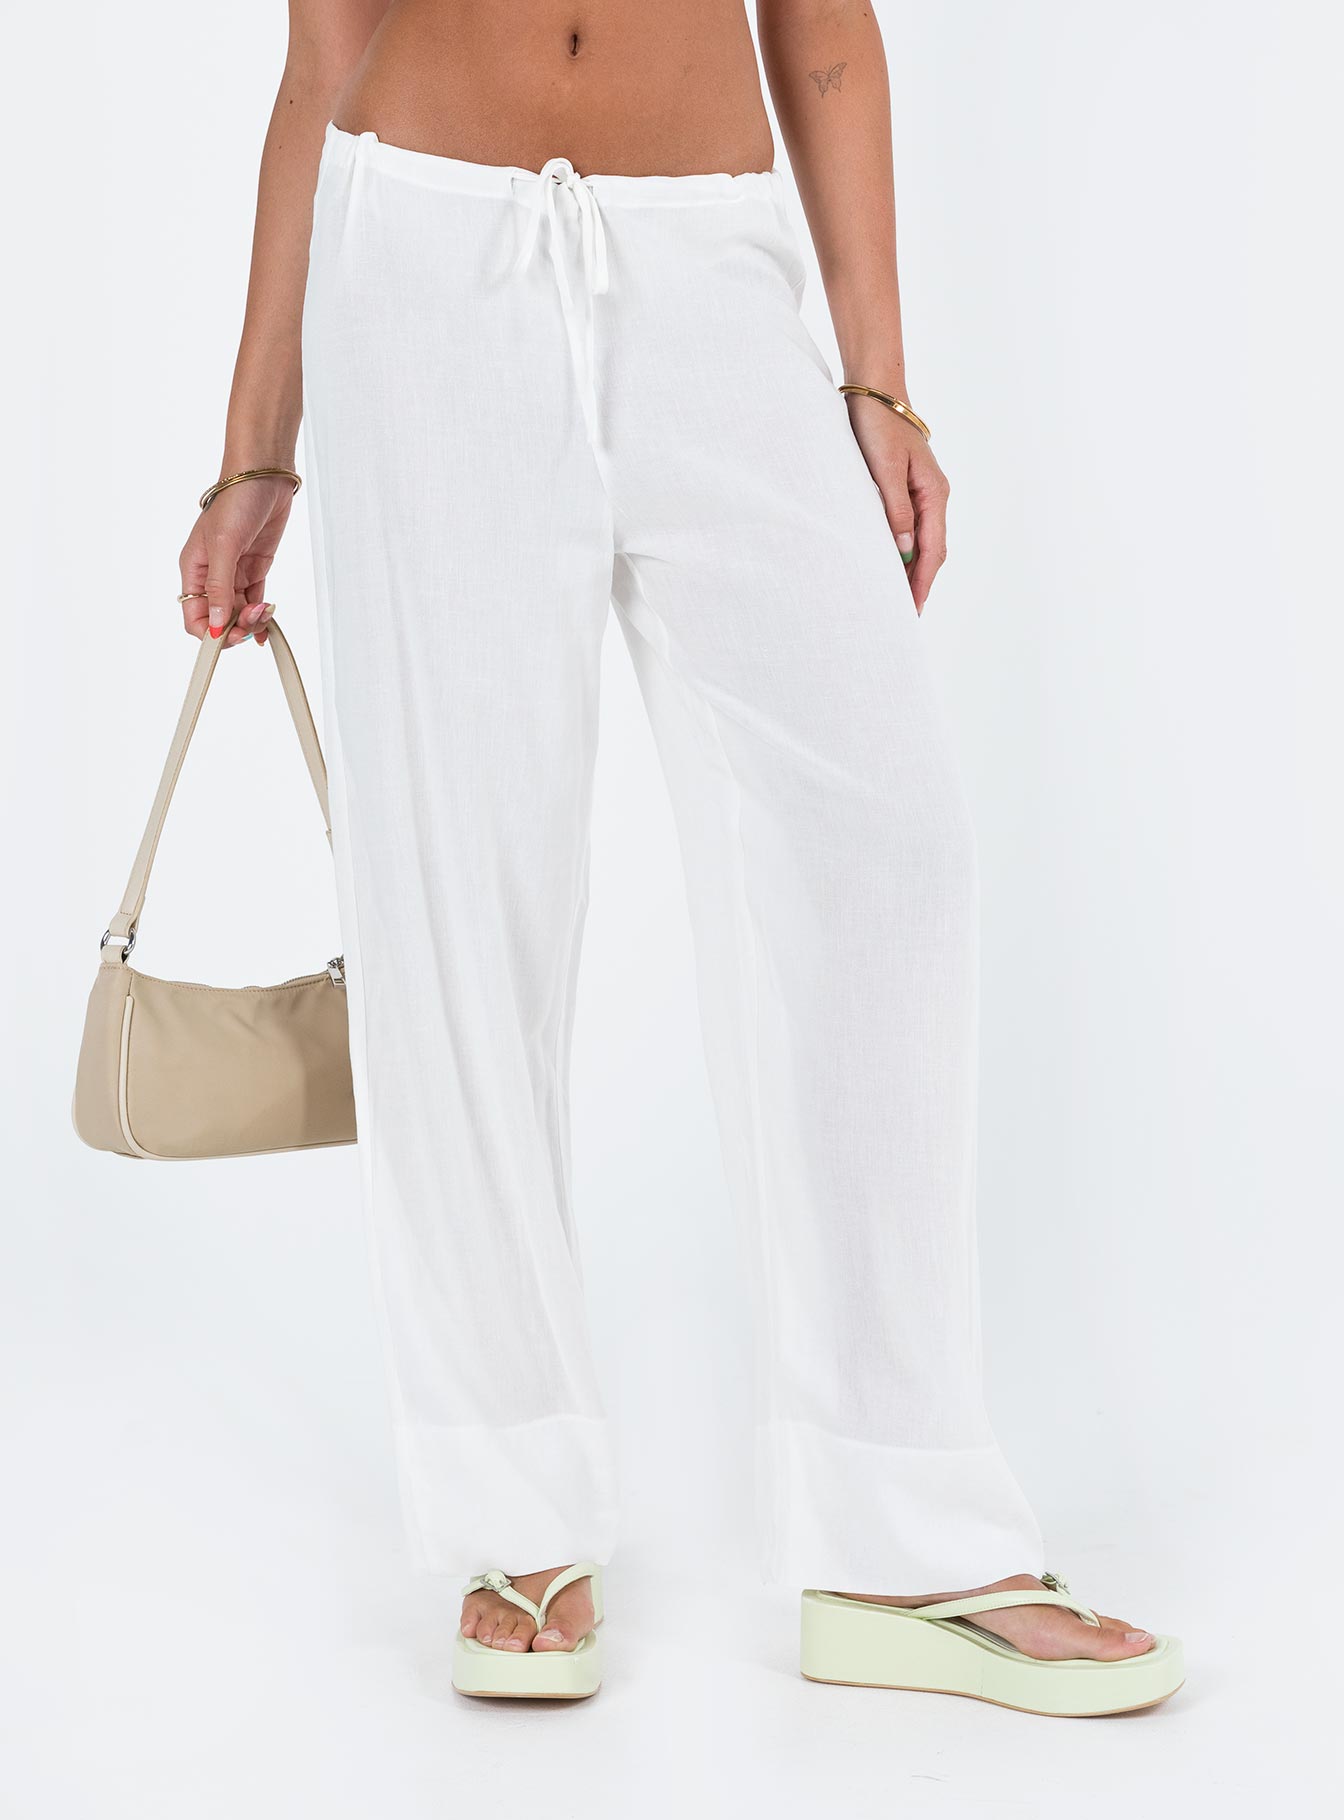 JNGSA Flowy Pants for Women Casual High Waisted Wide Leg Palazzo Pants  Trousers Solid Color Elastic Pants White 6 - Walmart.com